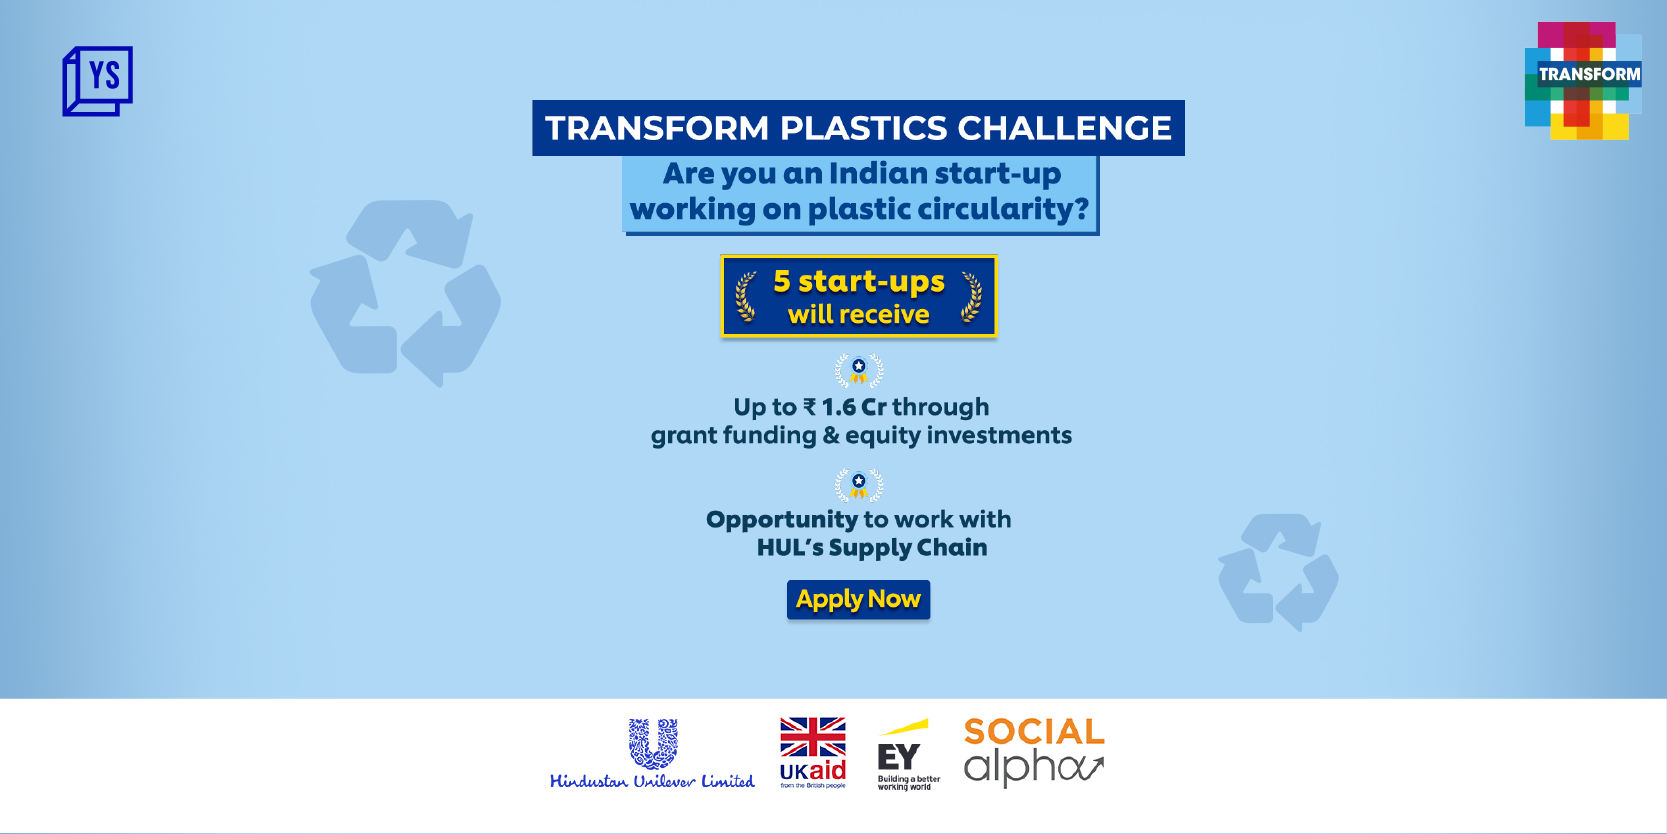 Startups, corporates, and governments can together TRANSFORM India’s approach to plastic circularity

